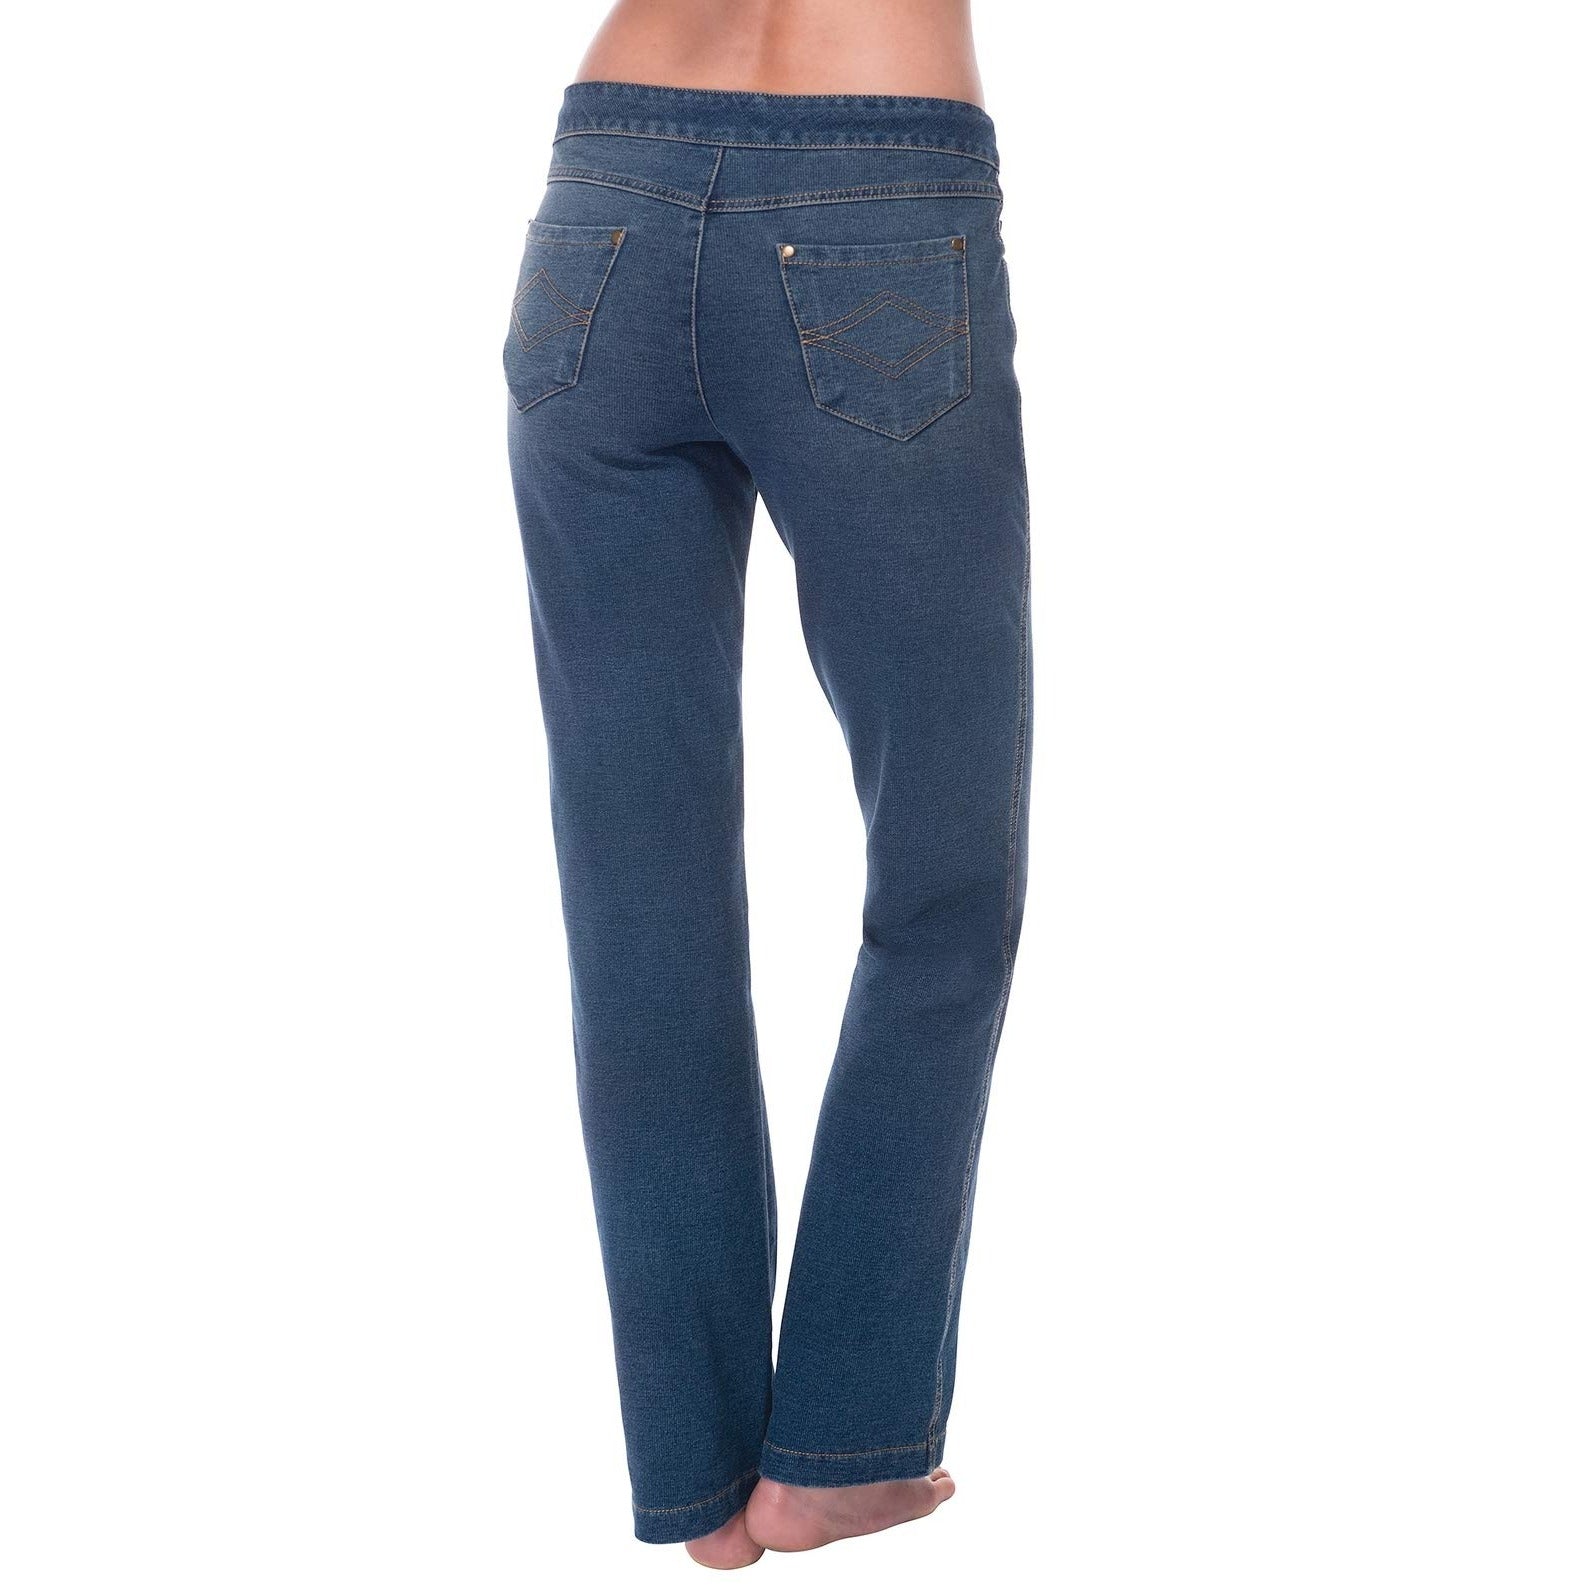 PajamaJeans® Bootcut Jeans - Washes in Women's Jeggings & Denim